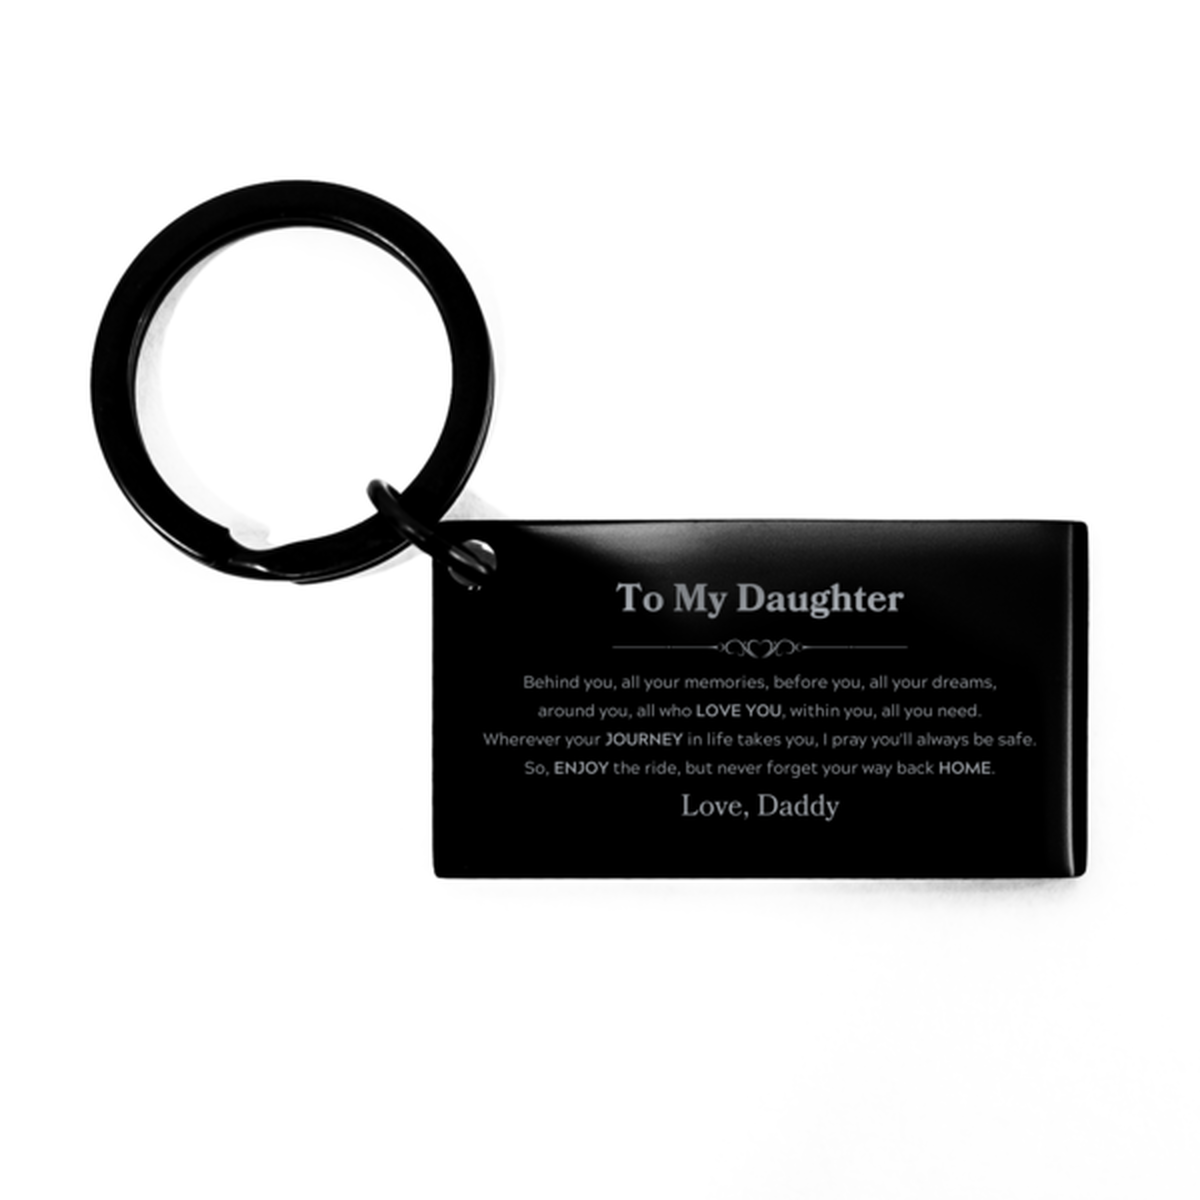 To My Daughter Graduation Gifts from Daddy, Daughter Keychain Christmas Birthday Gifts for Daughter Behind you, all your memories, before you, all your dreams. Love, Daddy